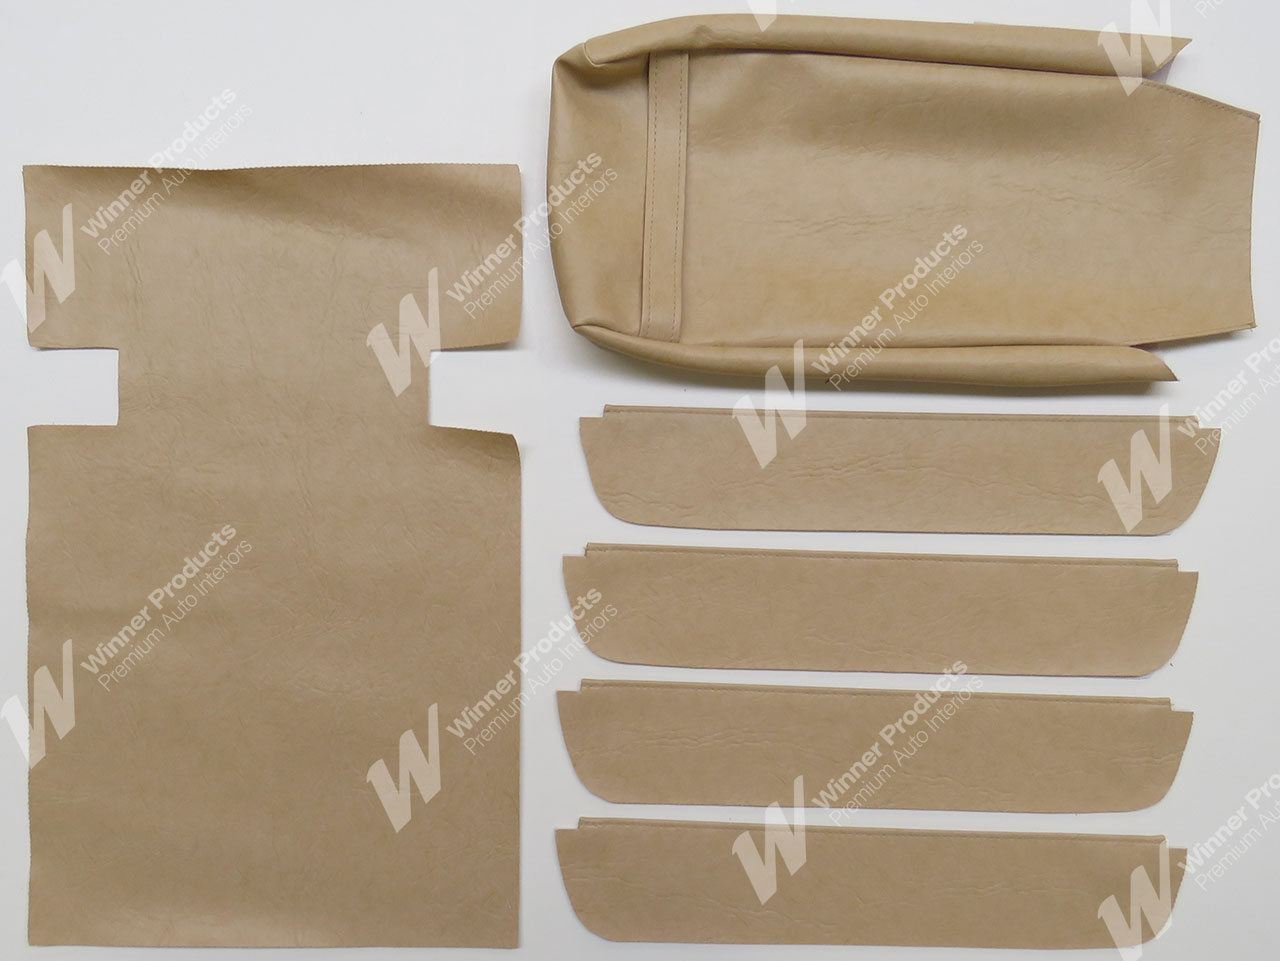 Ford GT XB GT Sedan C Chamois Seat Covers (Image 6 of 7)